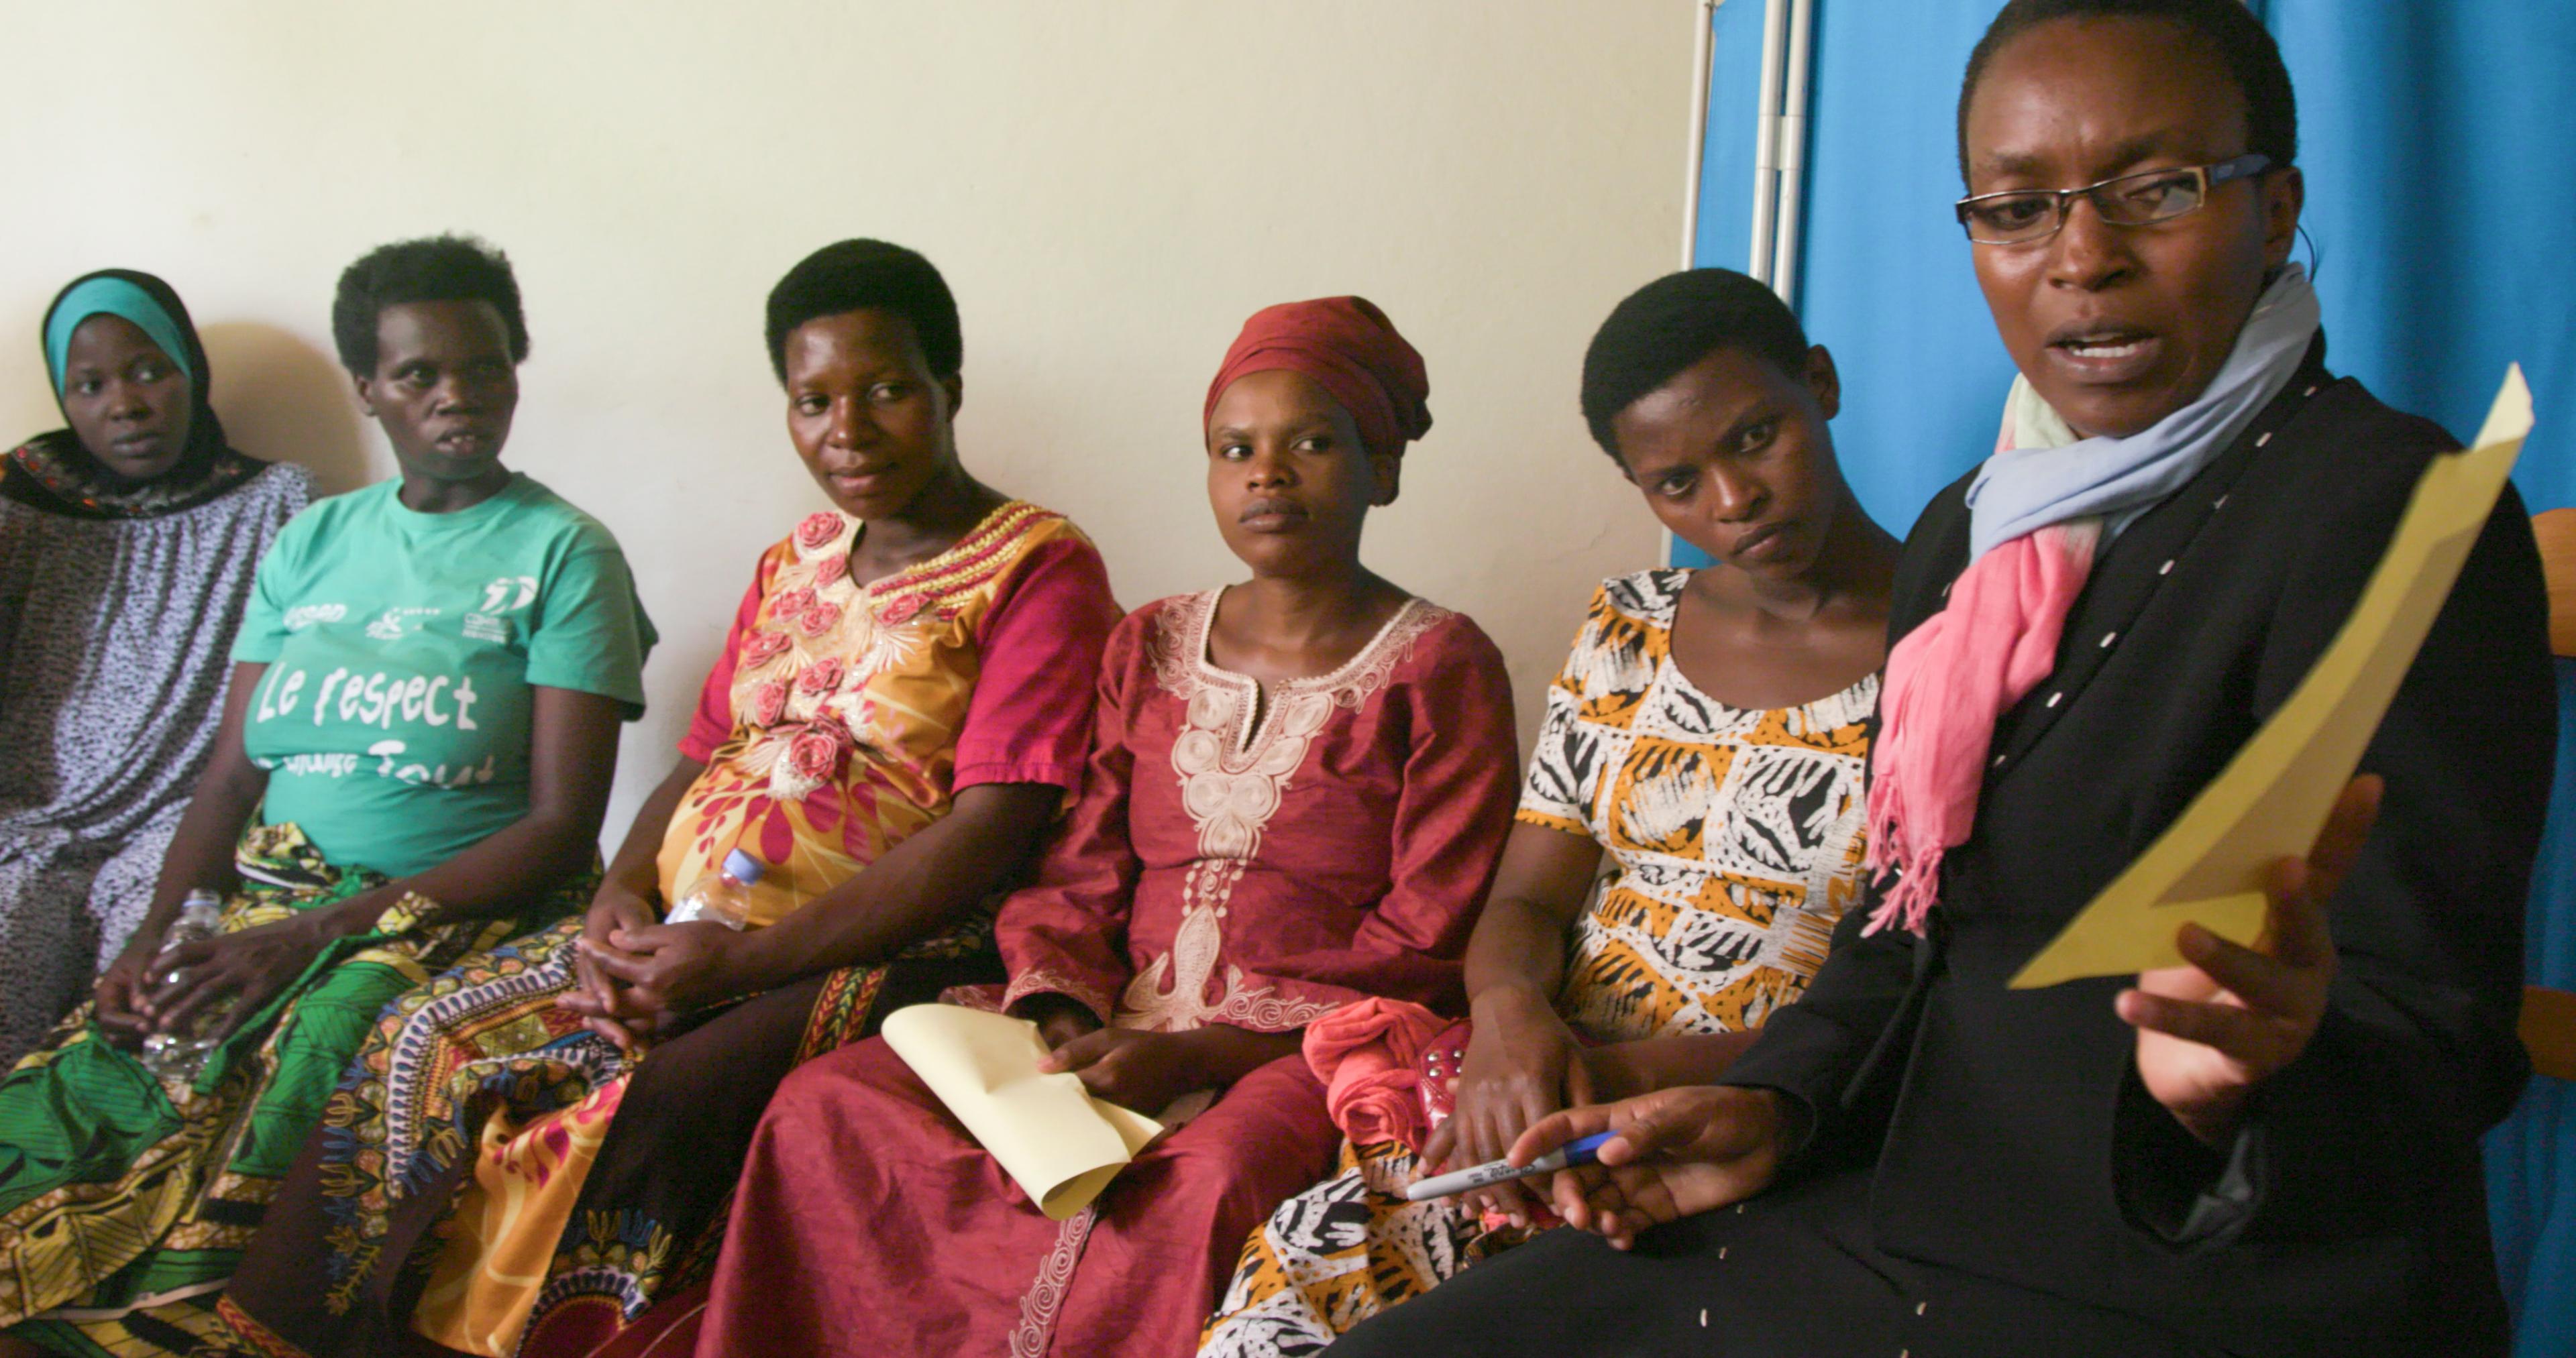 Group of East African pregnant women talking together